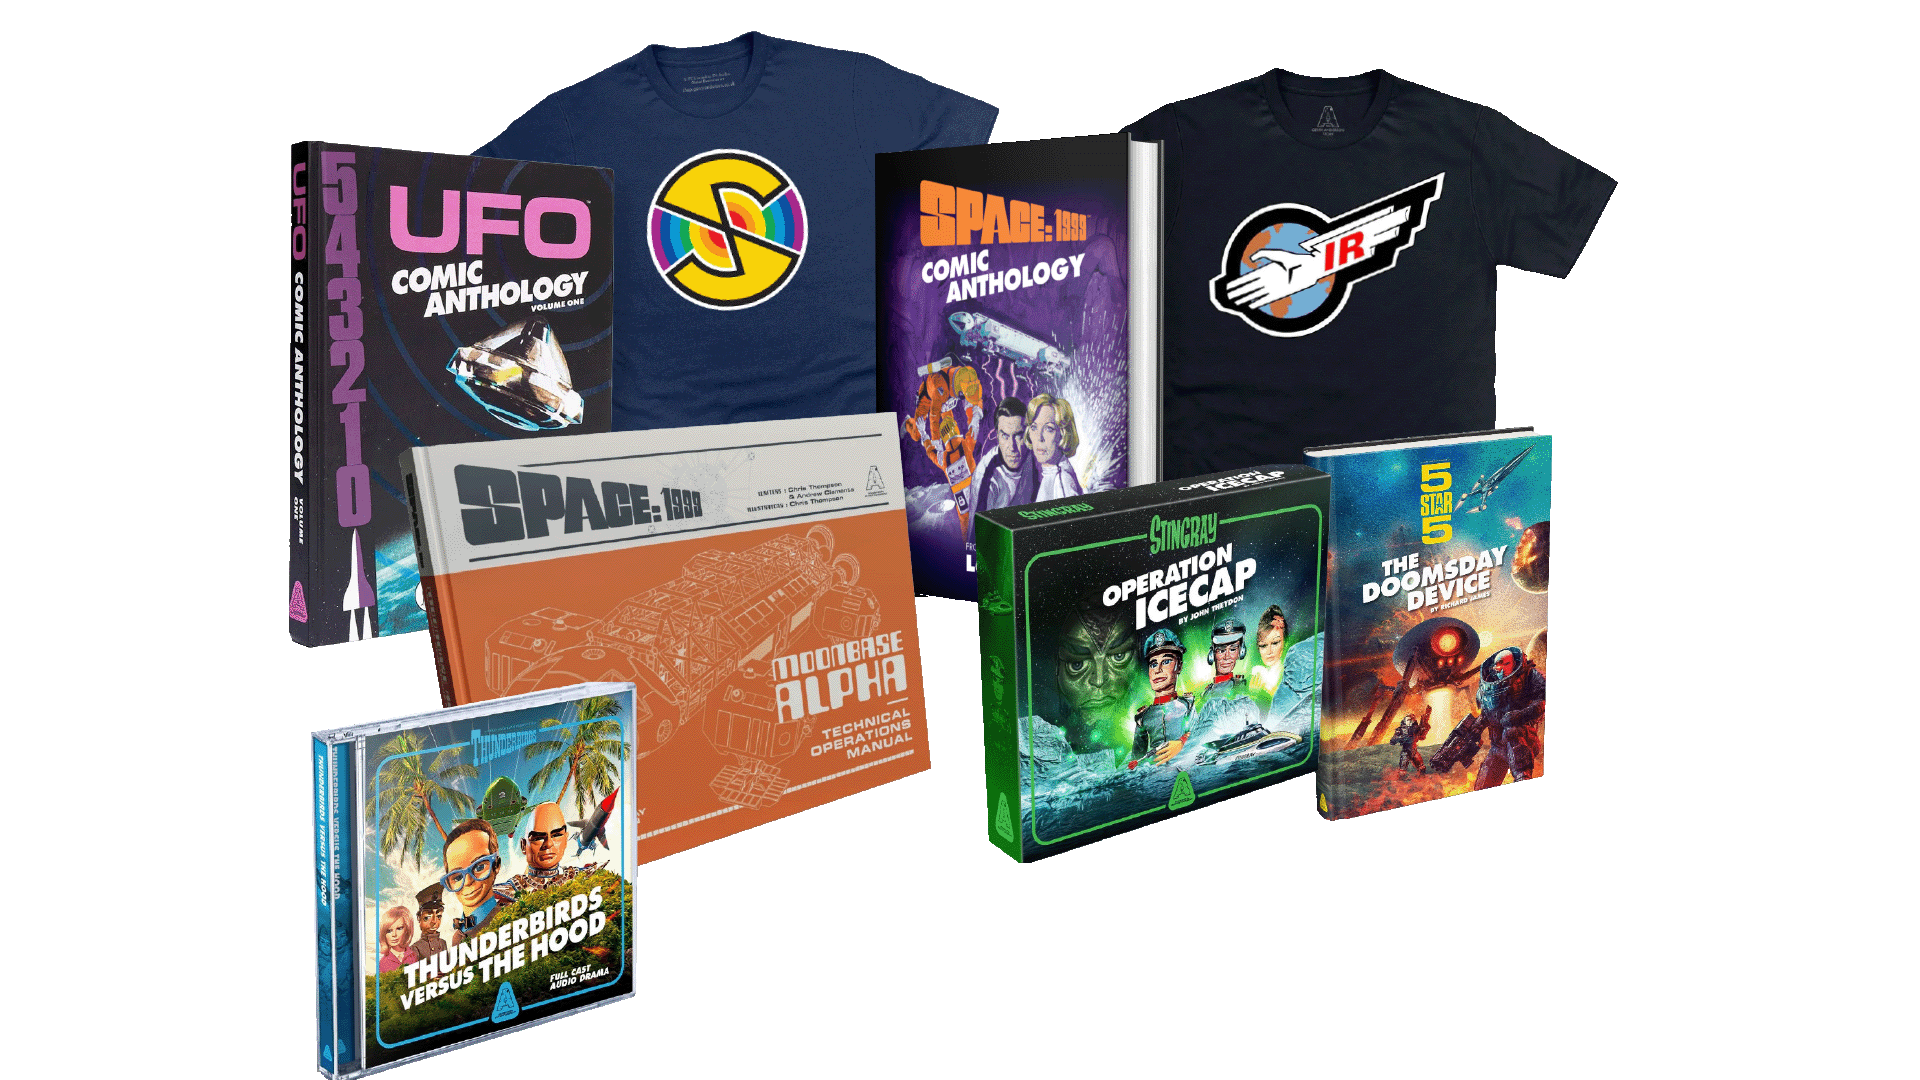 Collection of Anderson Entertainment products from DVDs, Audio Dramas, Clothing, Books, Comics and so much more...